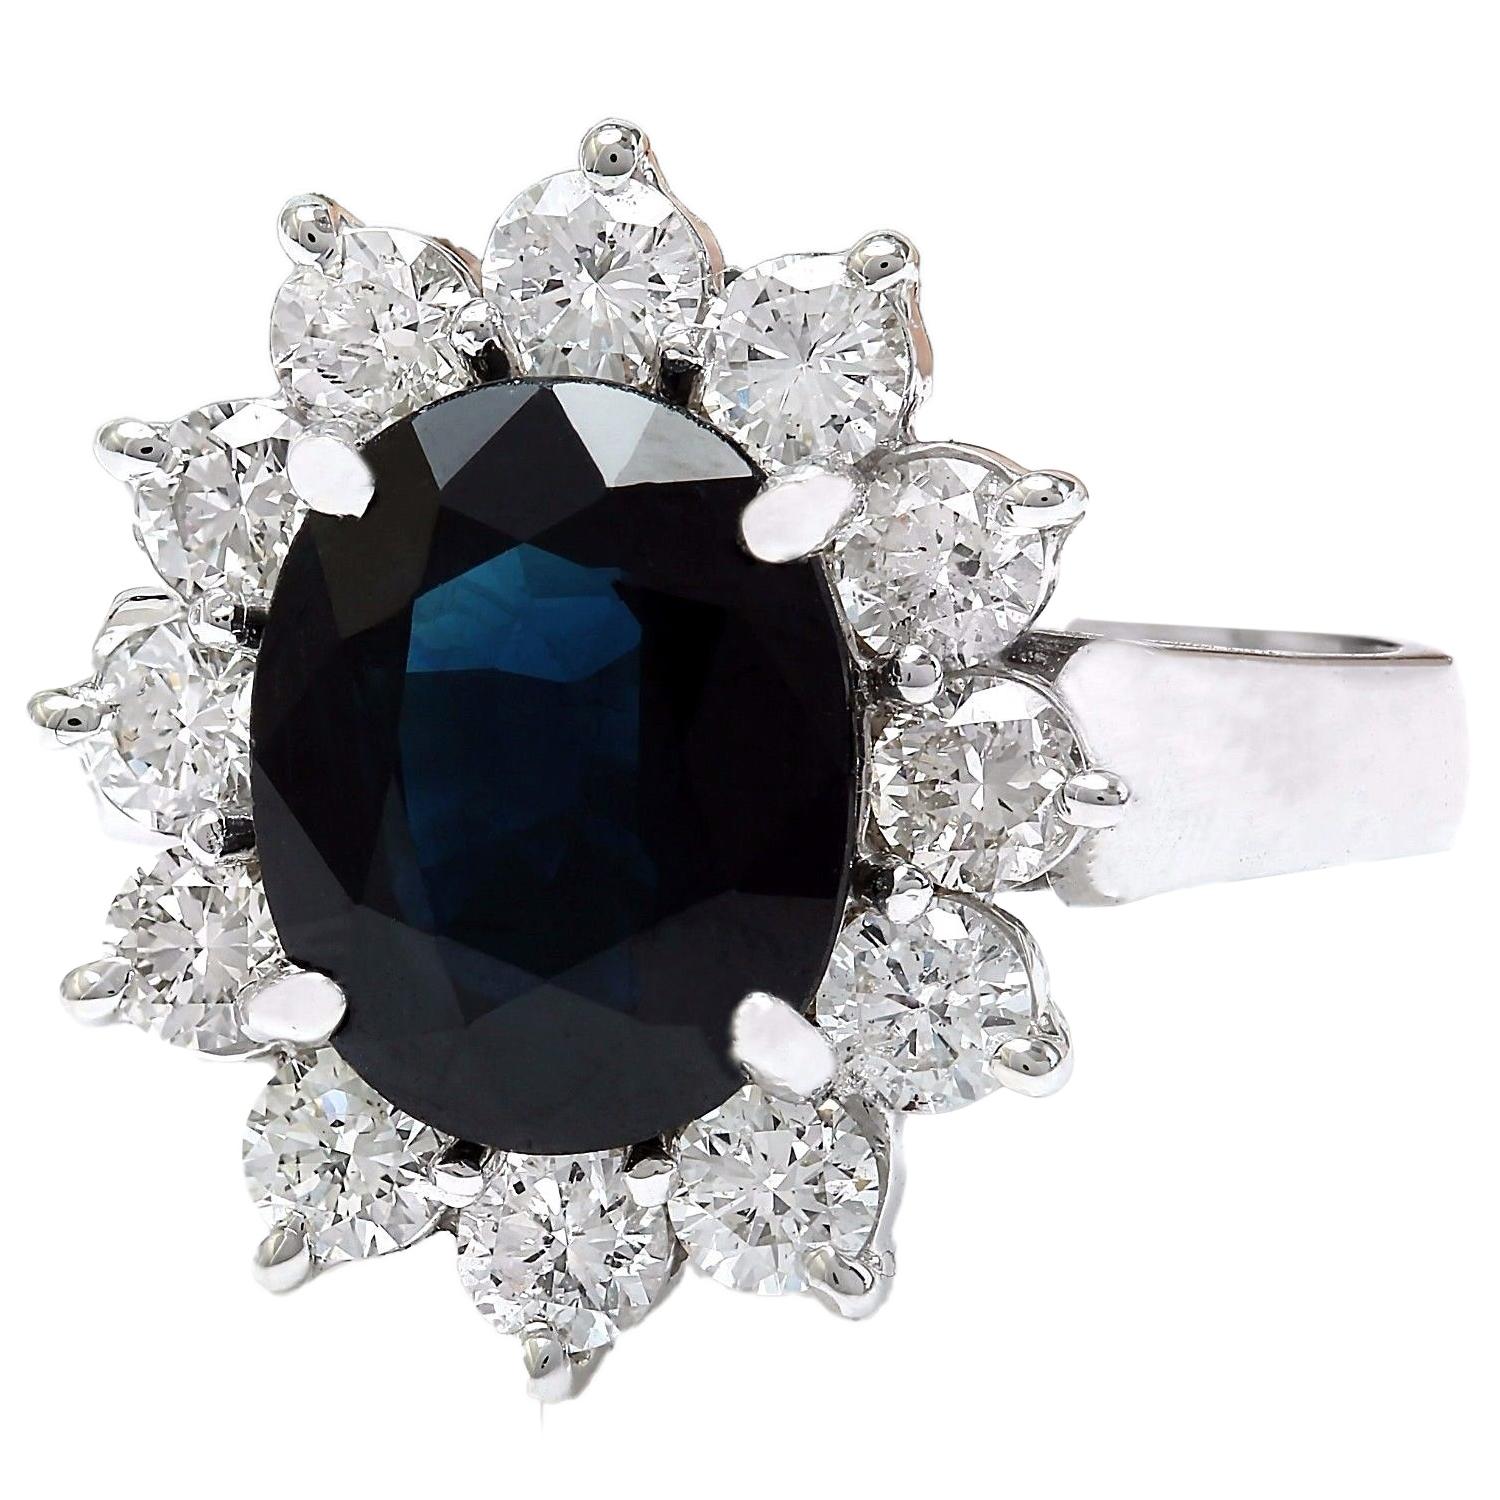 4.55 Carat Natural Sapphire 14K Solid White Gold Diamond Ring
 Item Type: Ring
 Item Style: Engagement
 Material: 14K White Gold
 Mainstone: Sapphire
 Stone Color: Blue
 Stone Weight: 3.45 Carat
 Stone Shape: Oval
 Stone Quantity: 1
 Stone